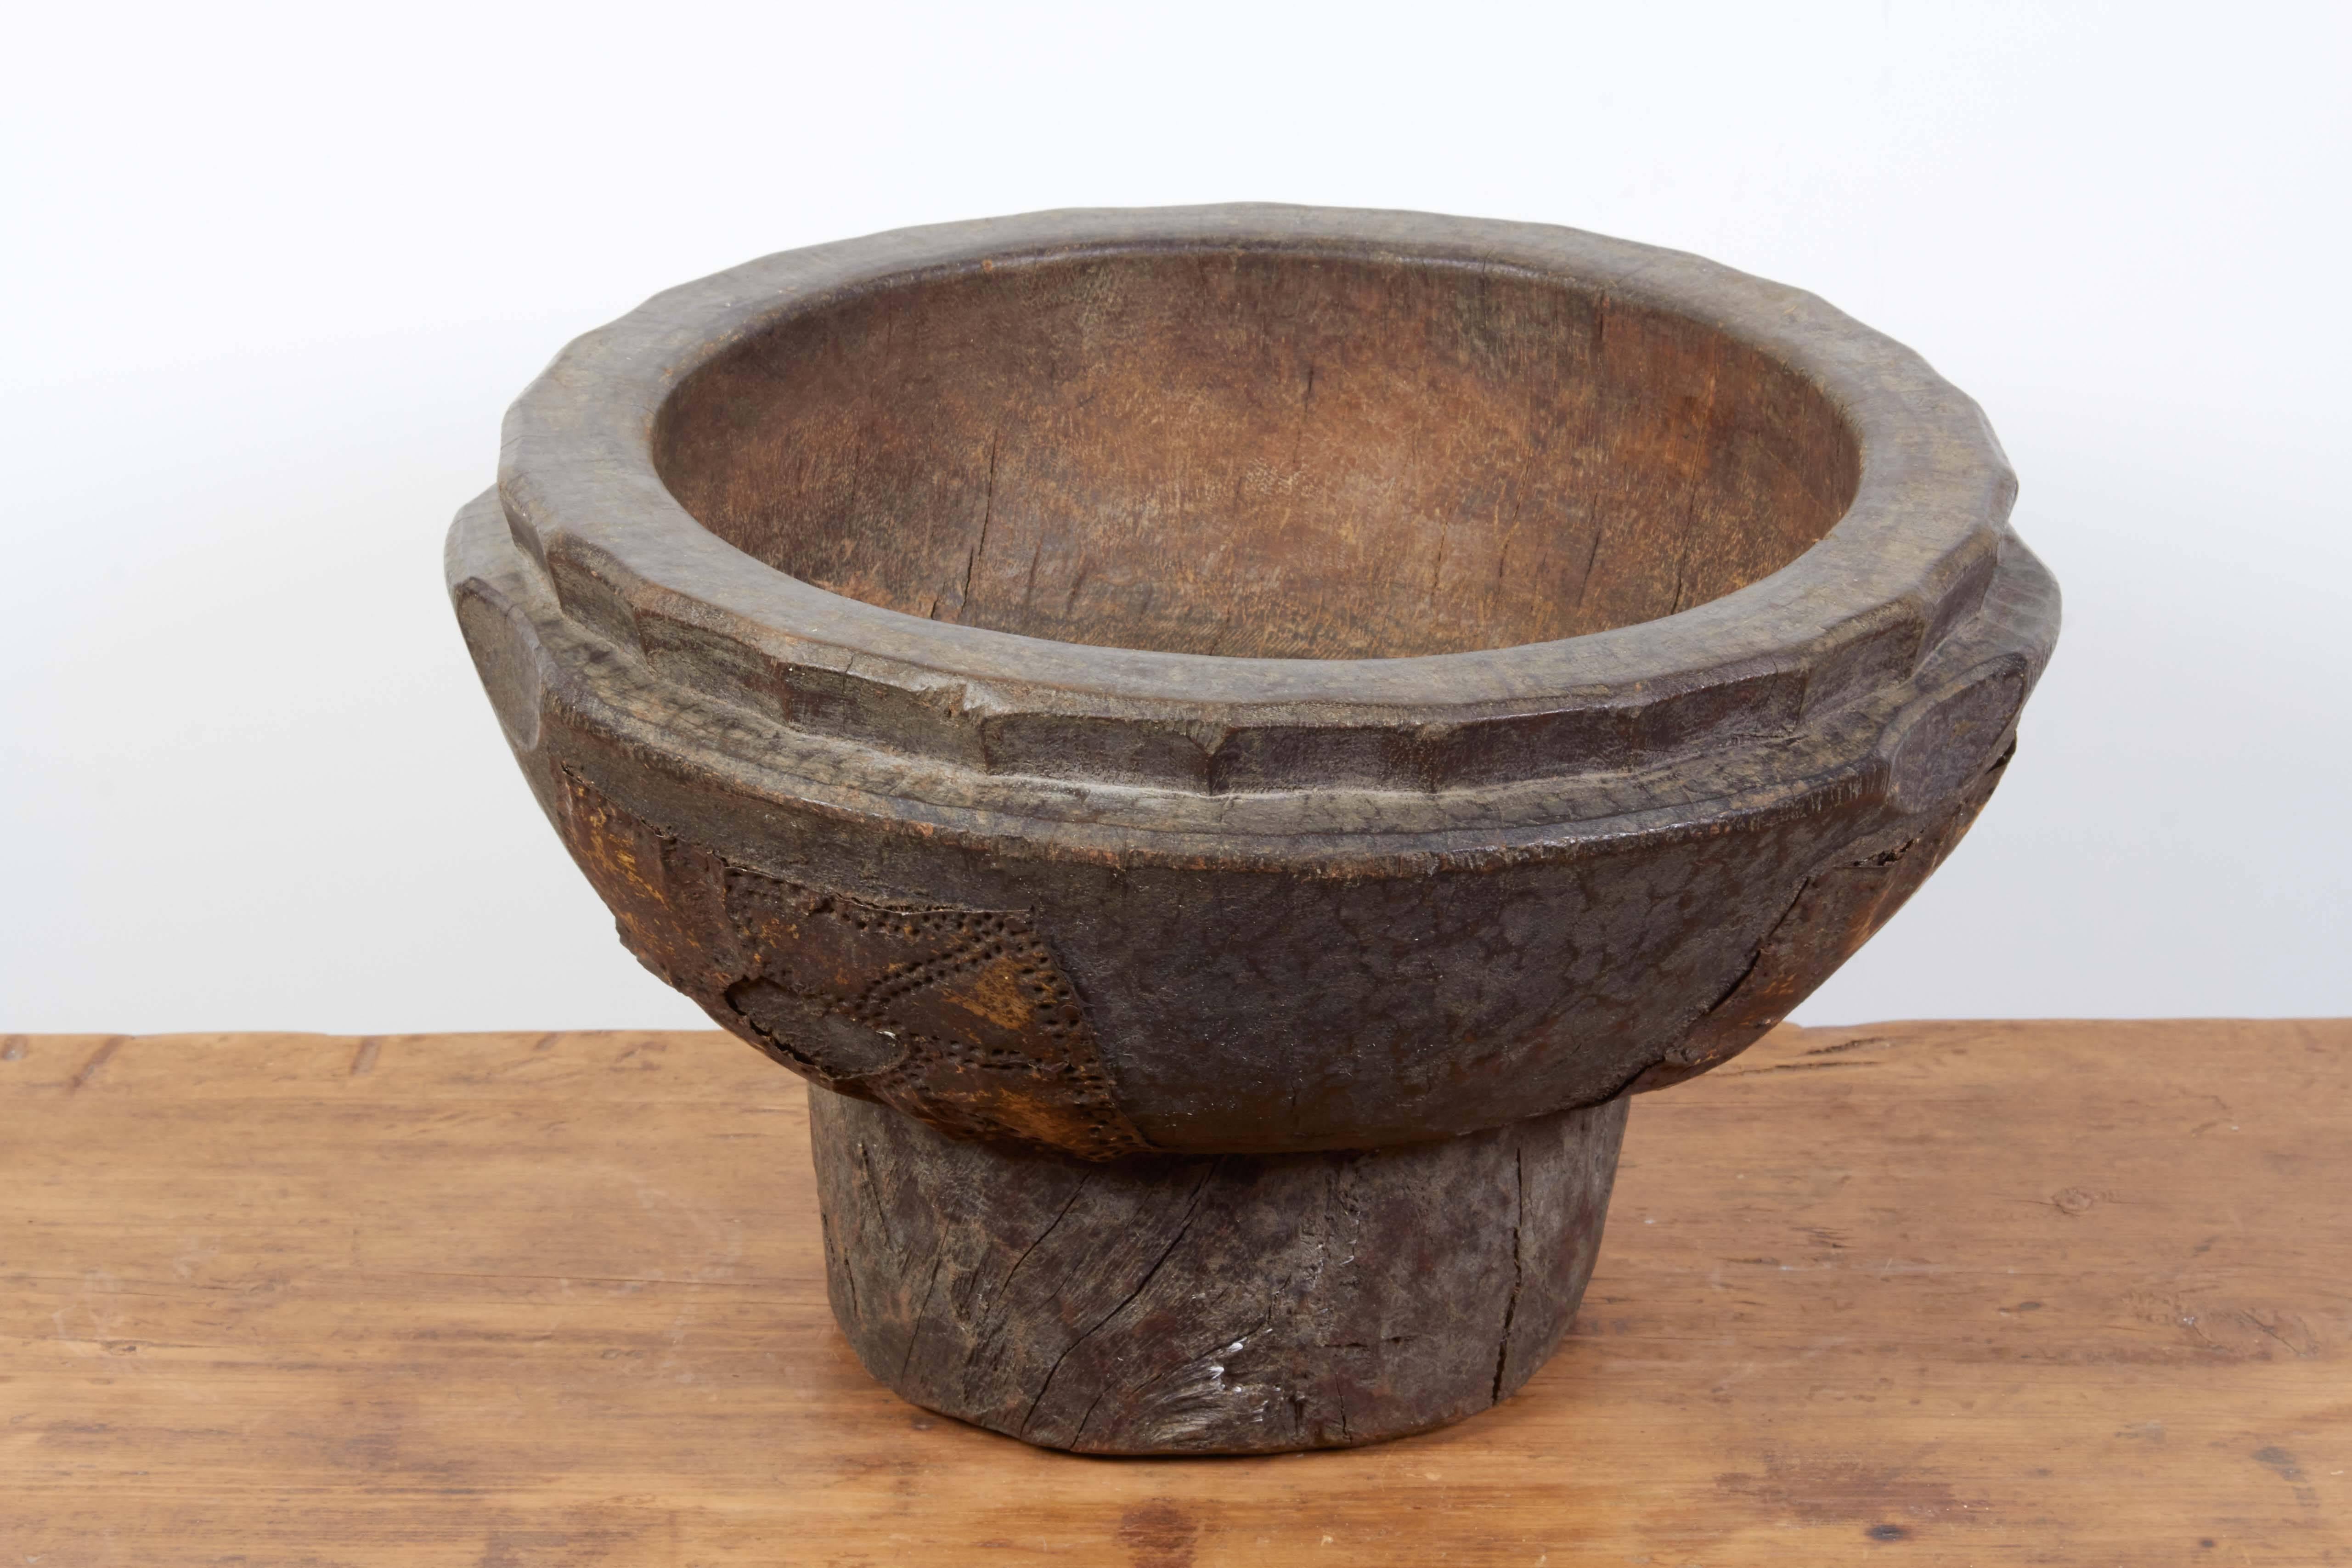 A heavy, thick walled antique West African bowl carved from a single piece of wood with great metal decorations. Subtle and attractive patina. This piece has great presence and would make a beautiful centerpiece.
BT396.